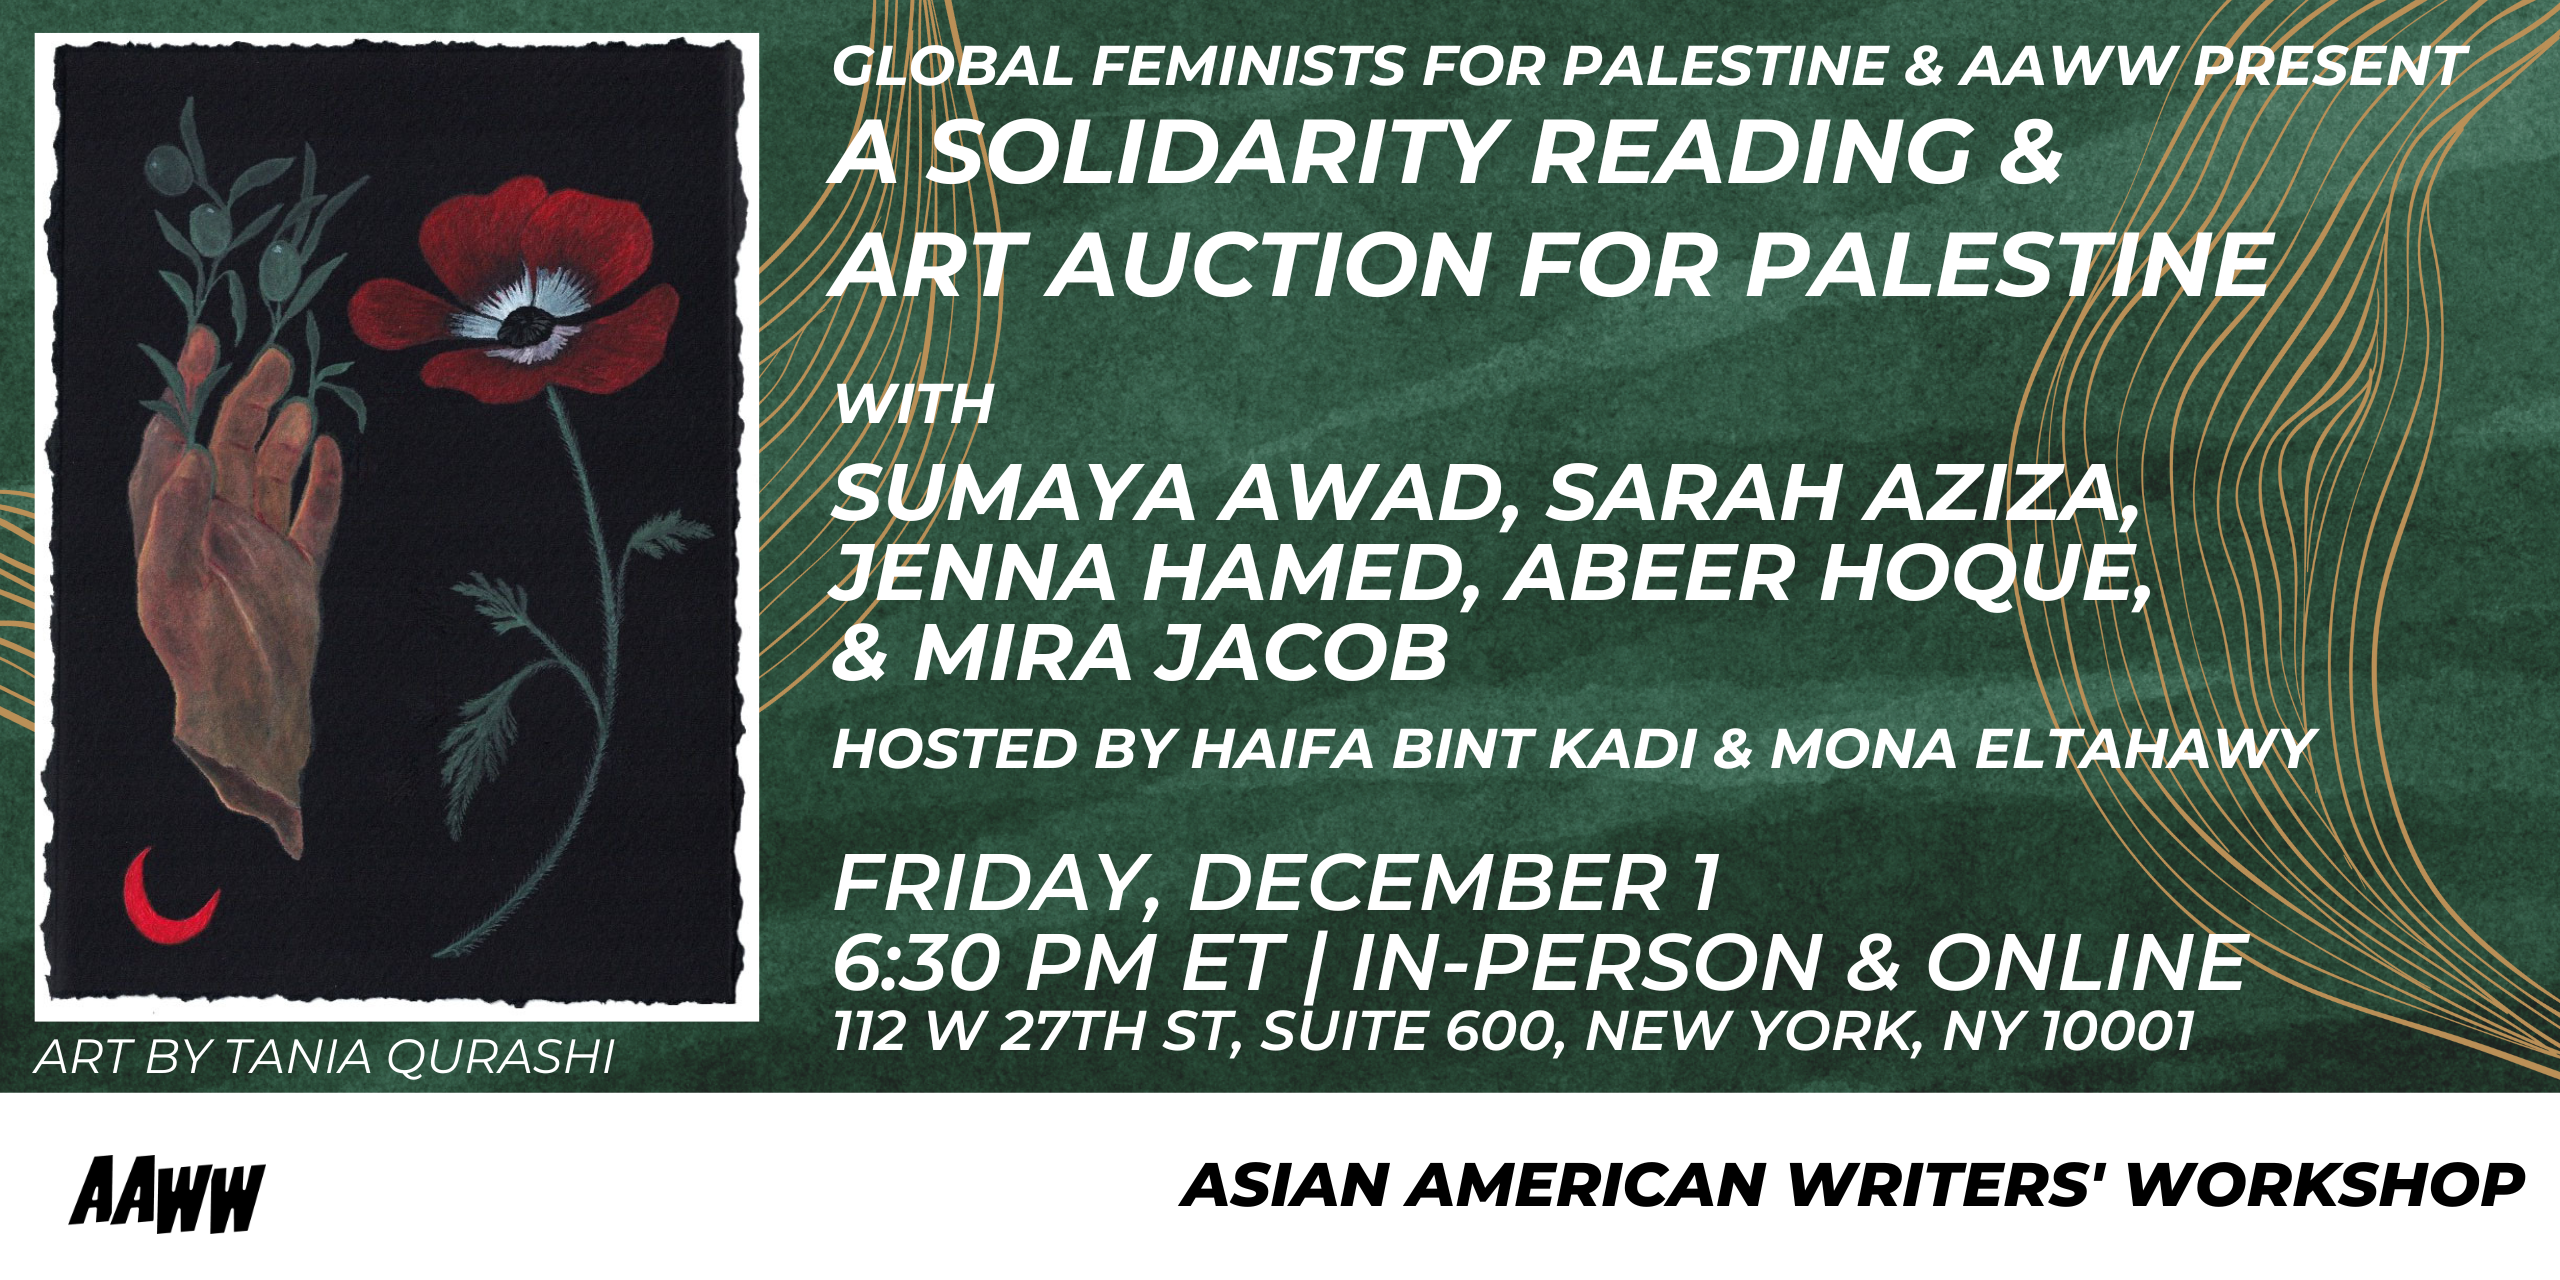 [In-Person] A Solidarity Reading & Art Auction for Palestine